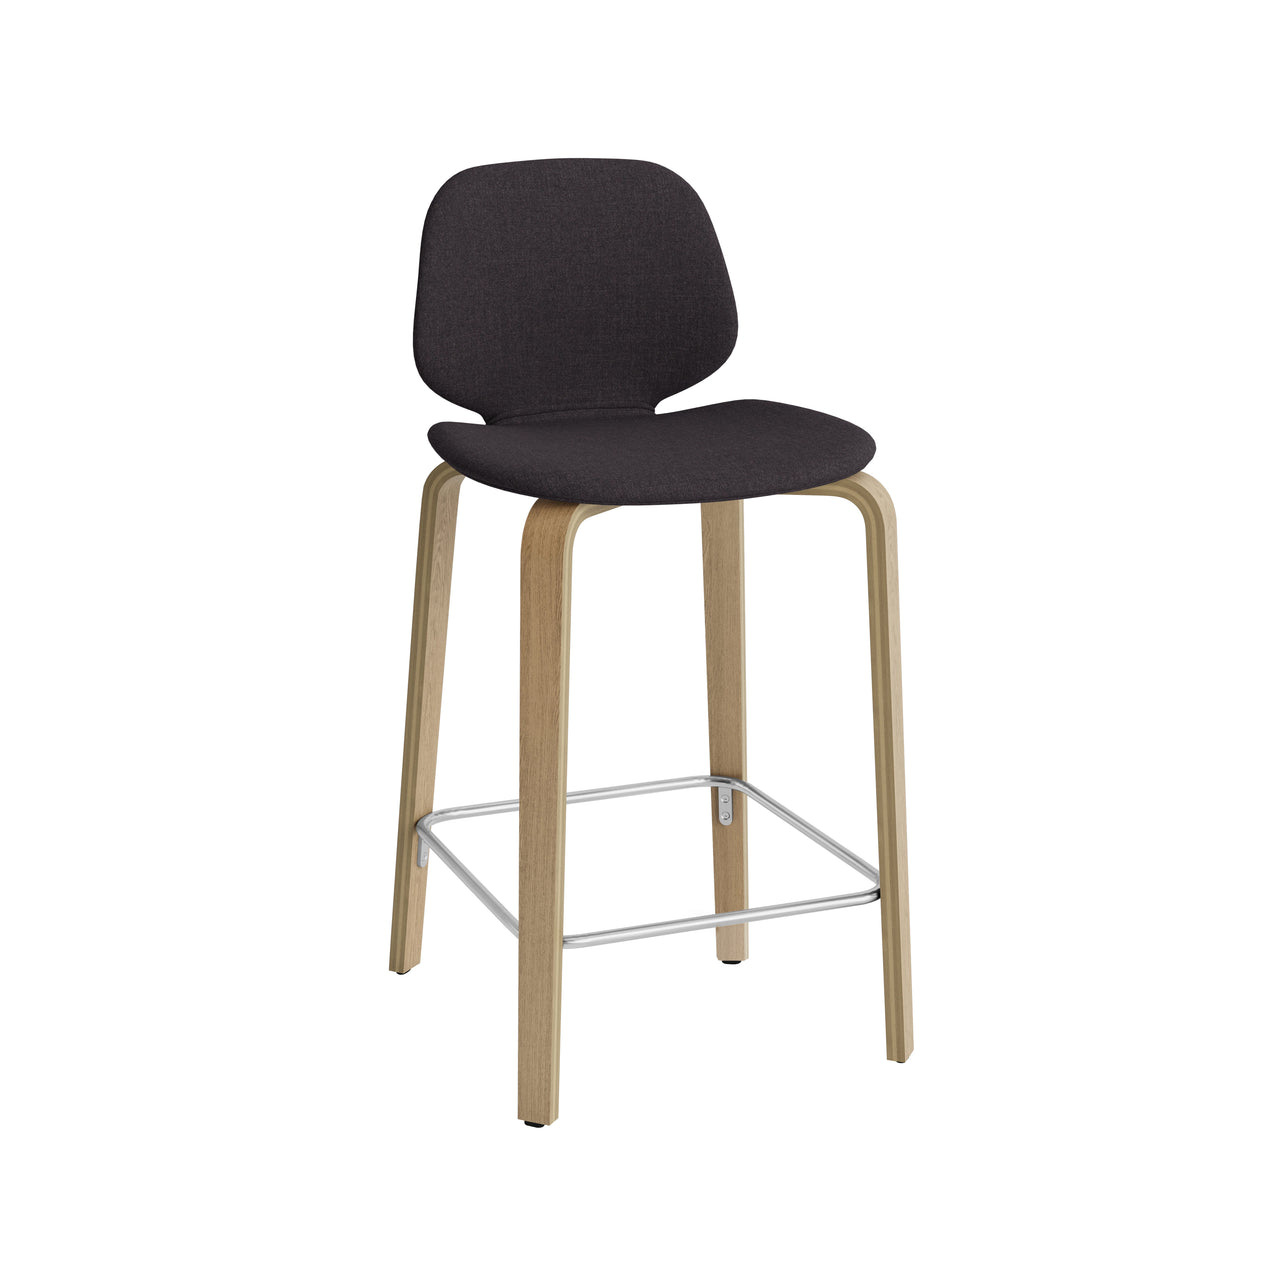 My Chair Bar + Counter Stool: Wood Base + Fully Upholstered + Counter